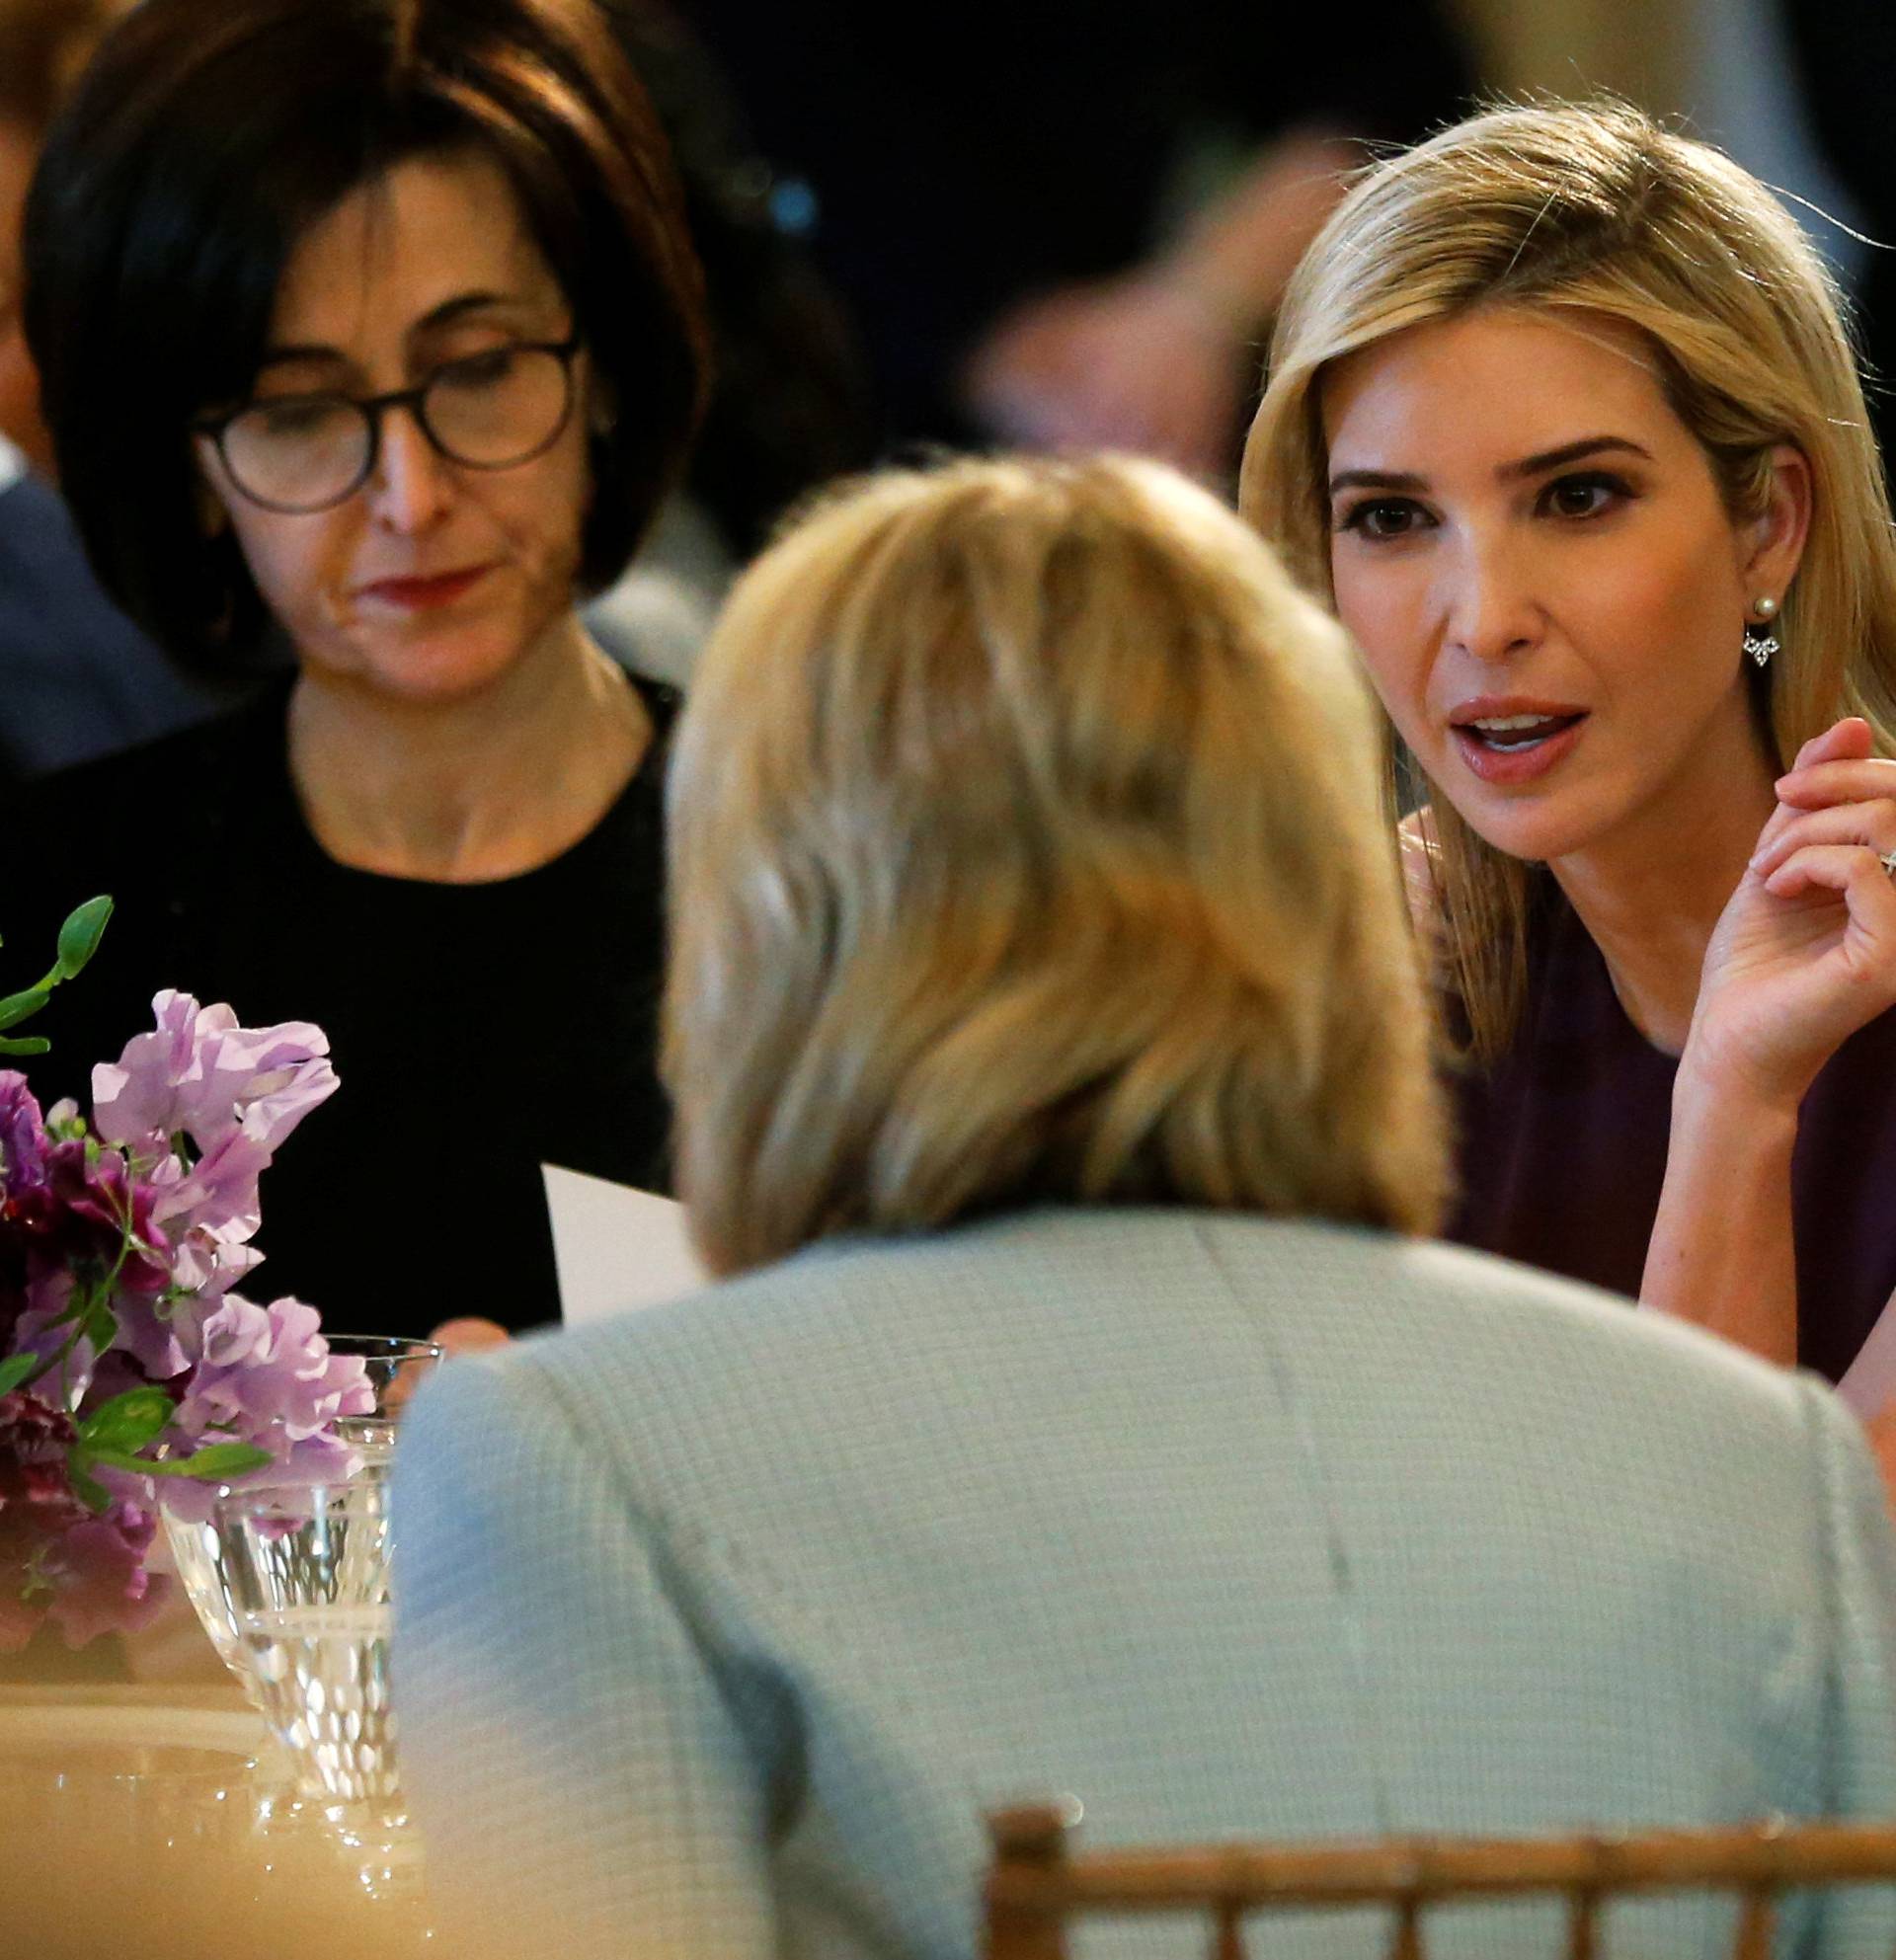 Ivanka Trump joins the U.S. first lady as she welcomes guests for an International Women's Day luncheon at the White House in Washington